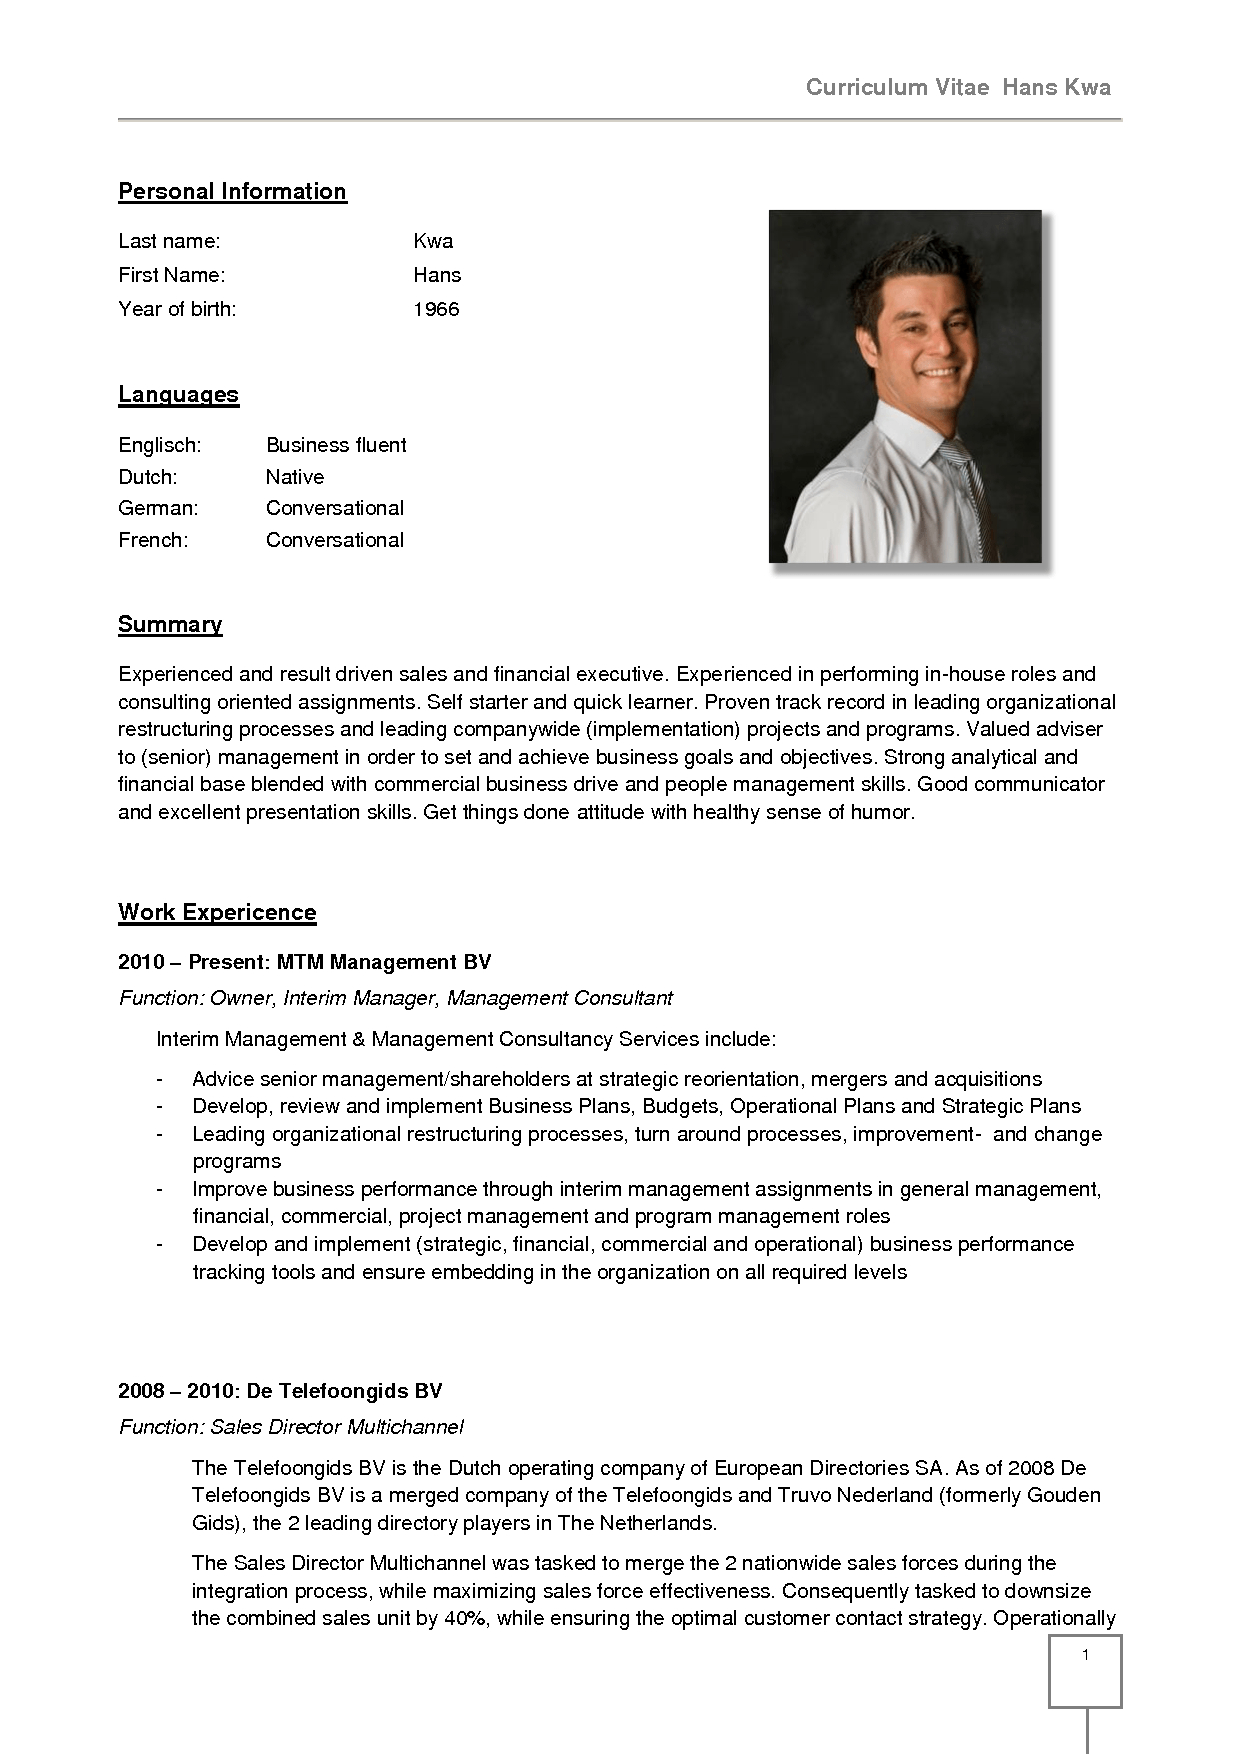 Cv Template Germany Cv Template Cv Template Doc for proportions 1240 X 1754